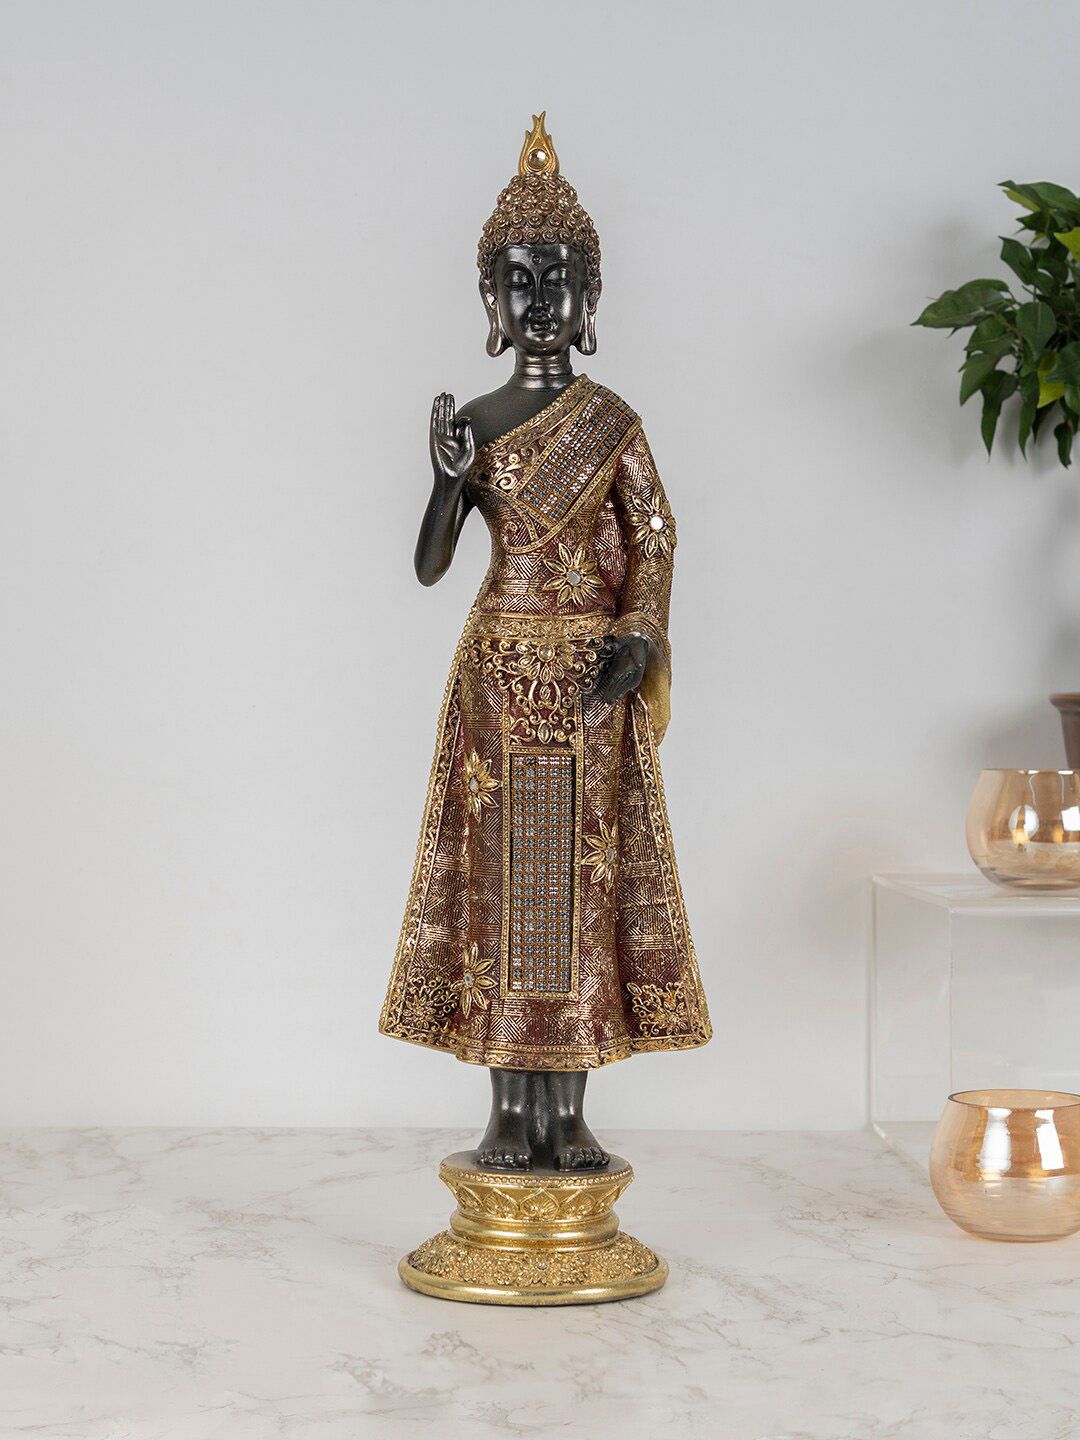 HomeTown Black & Gold-Toned Buddha Showpiece Price in India